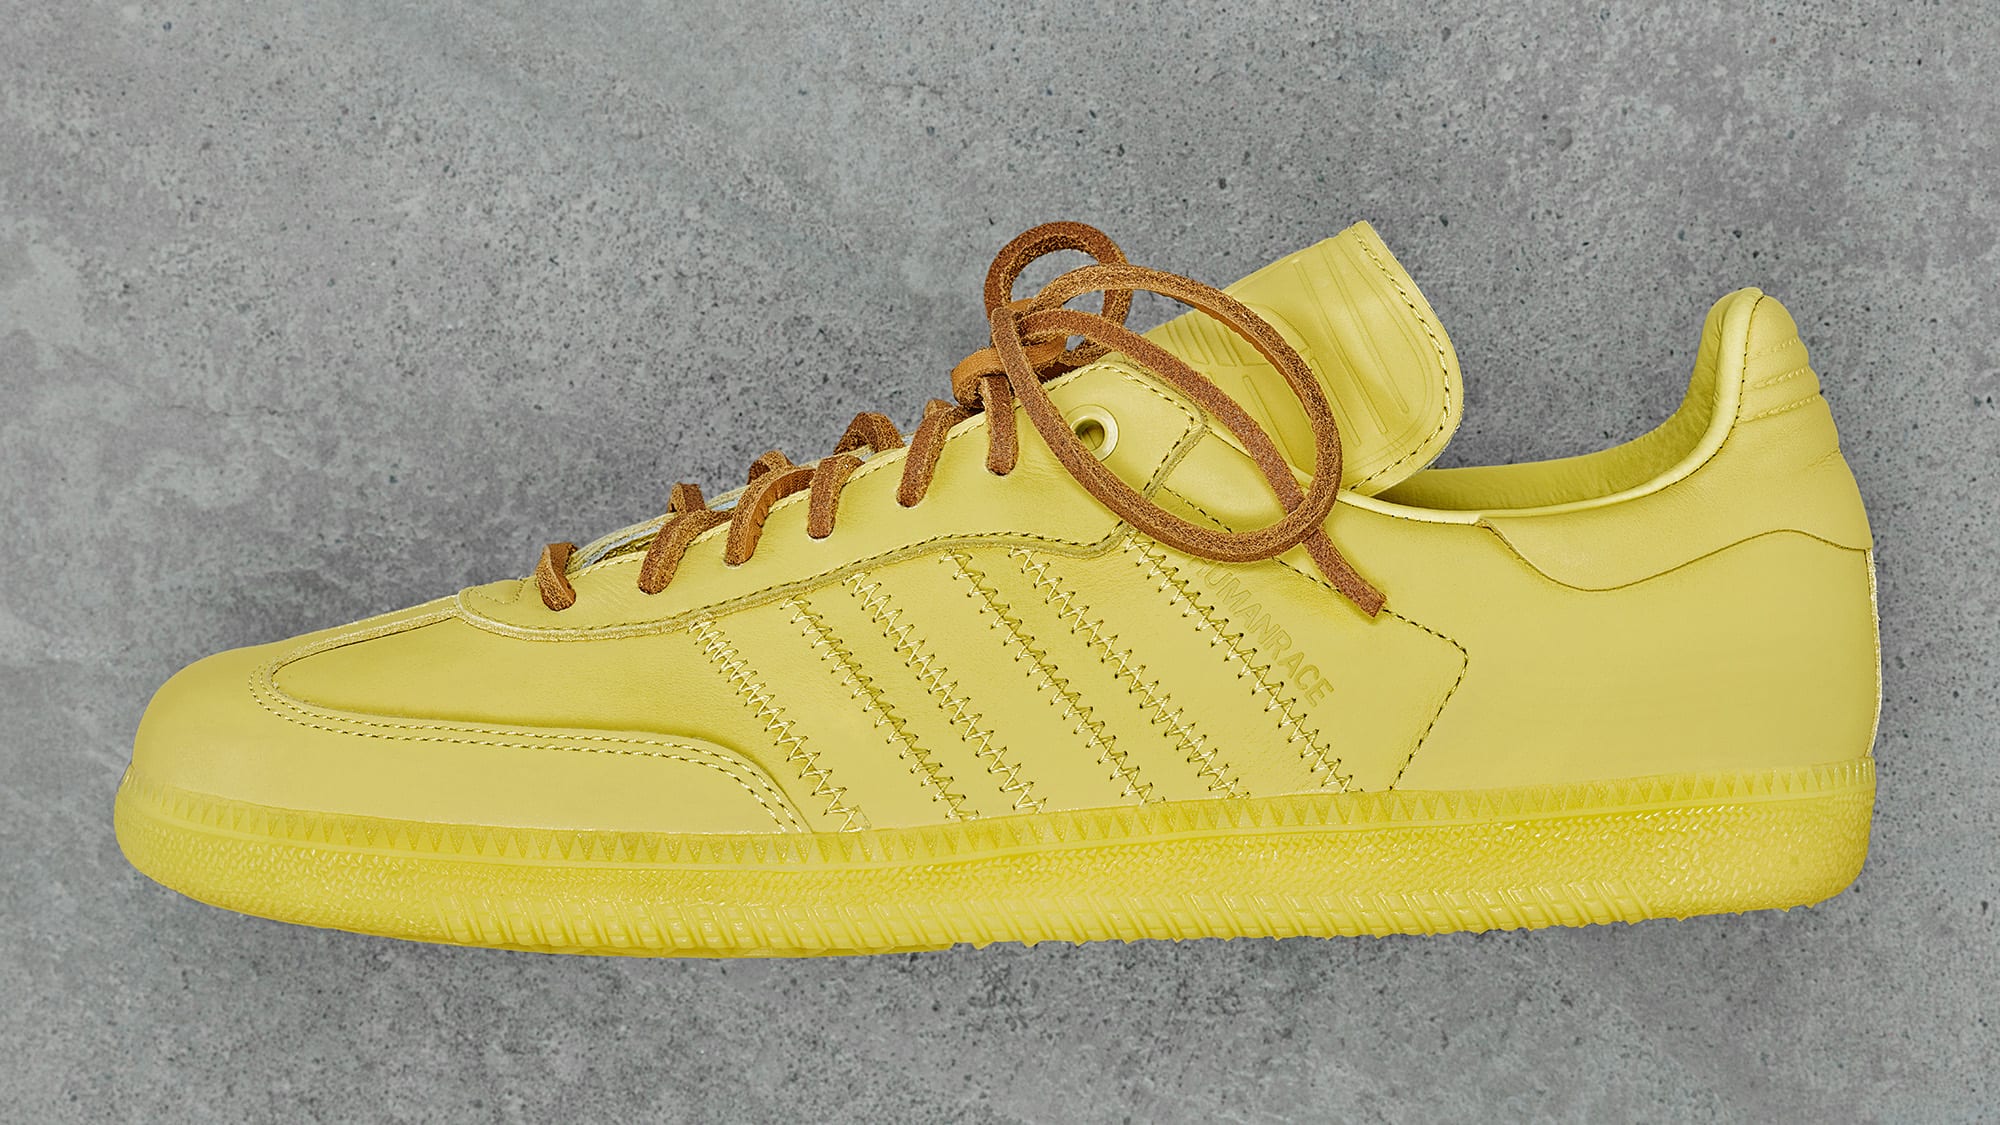 Pharrell's new drop is another reason to obsess over the Adidas Samba